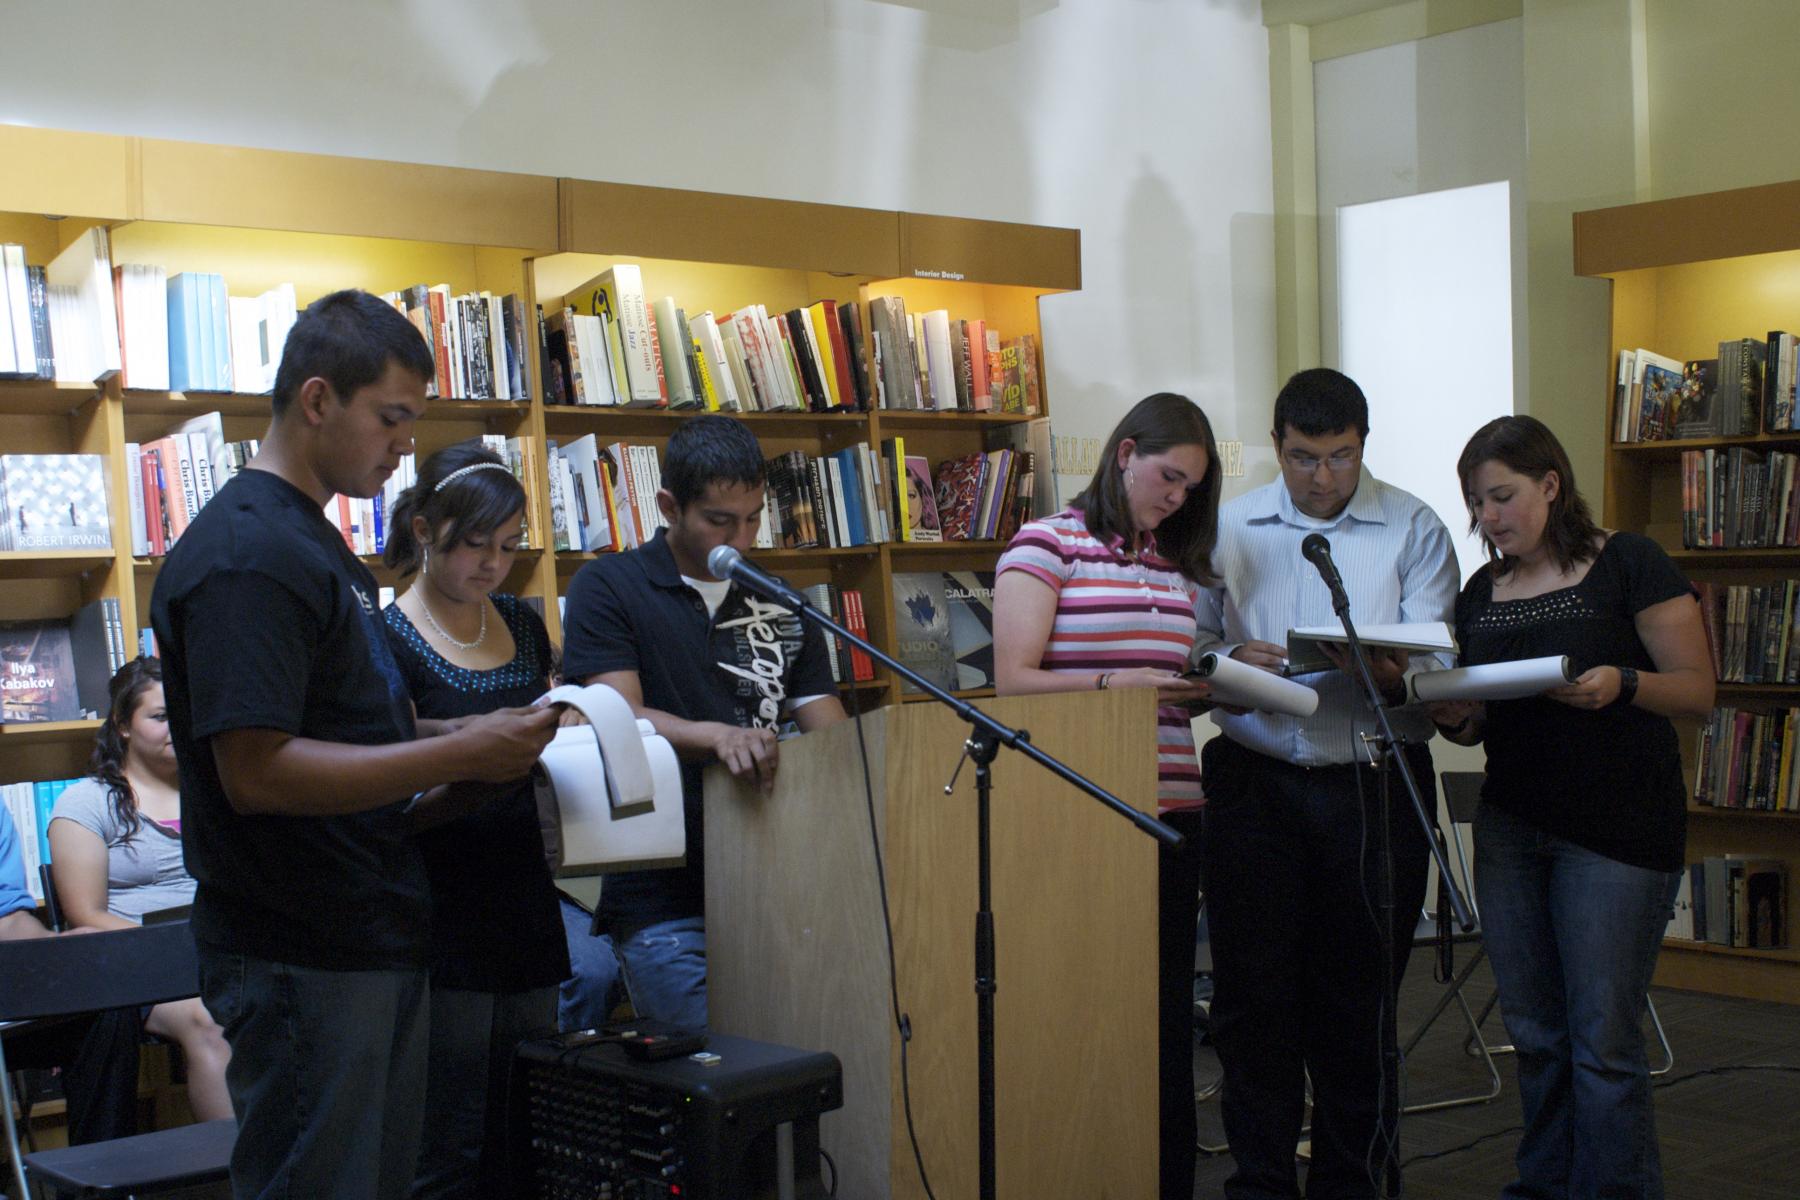 Marfa students reading their poetry